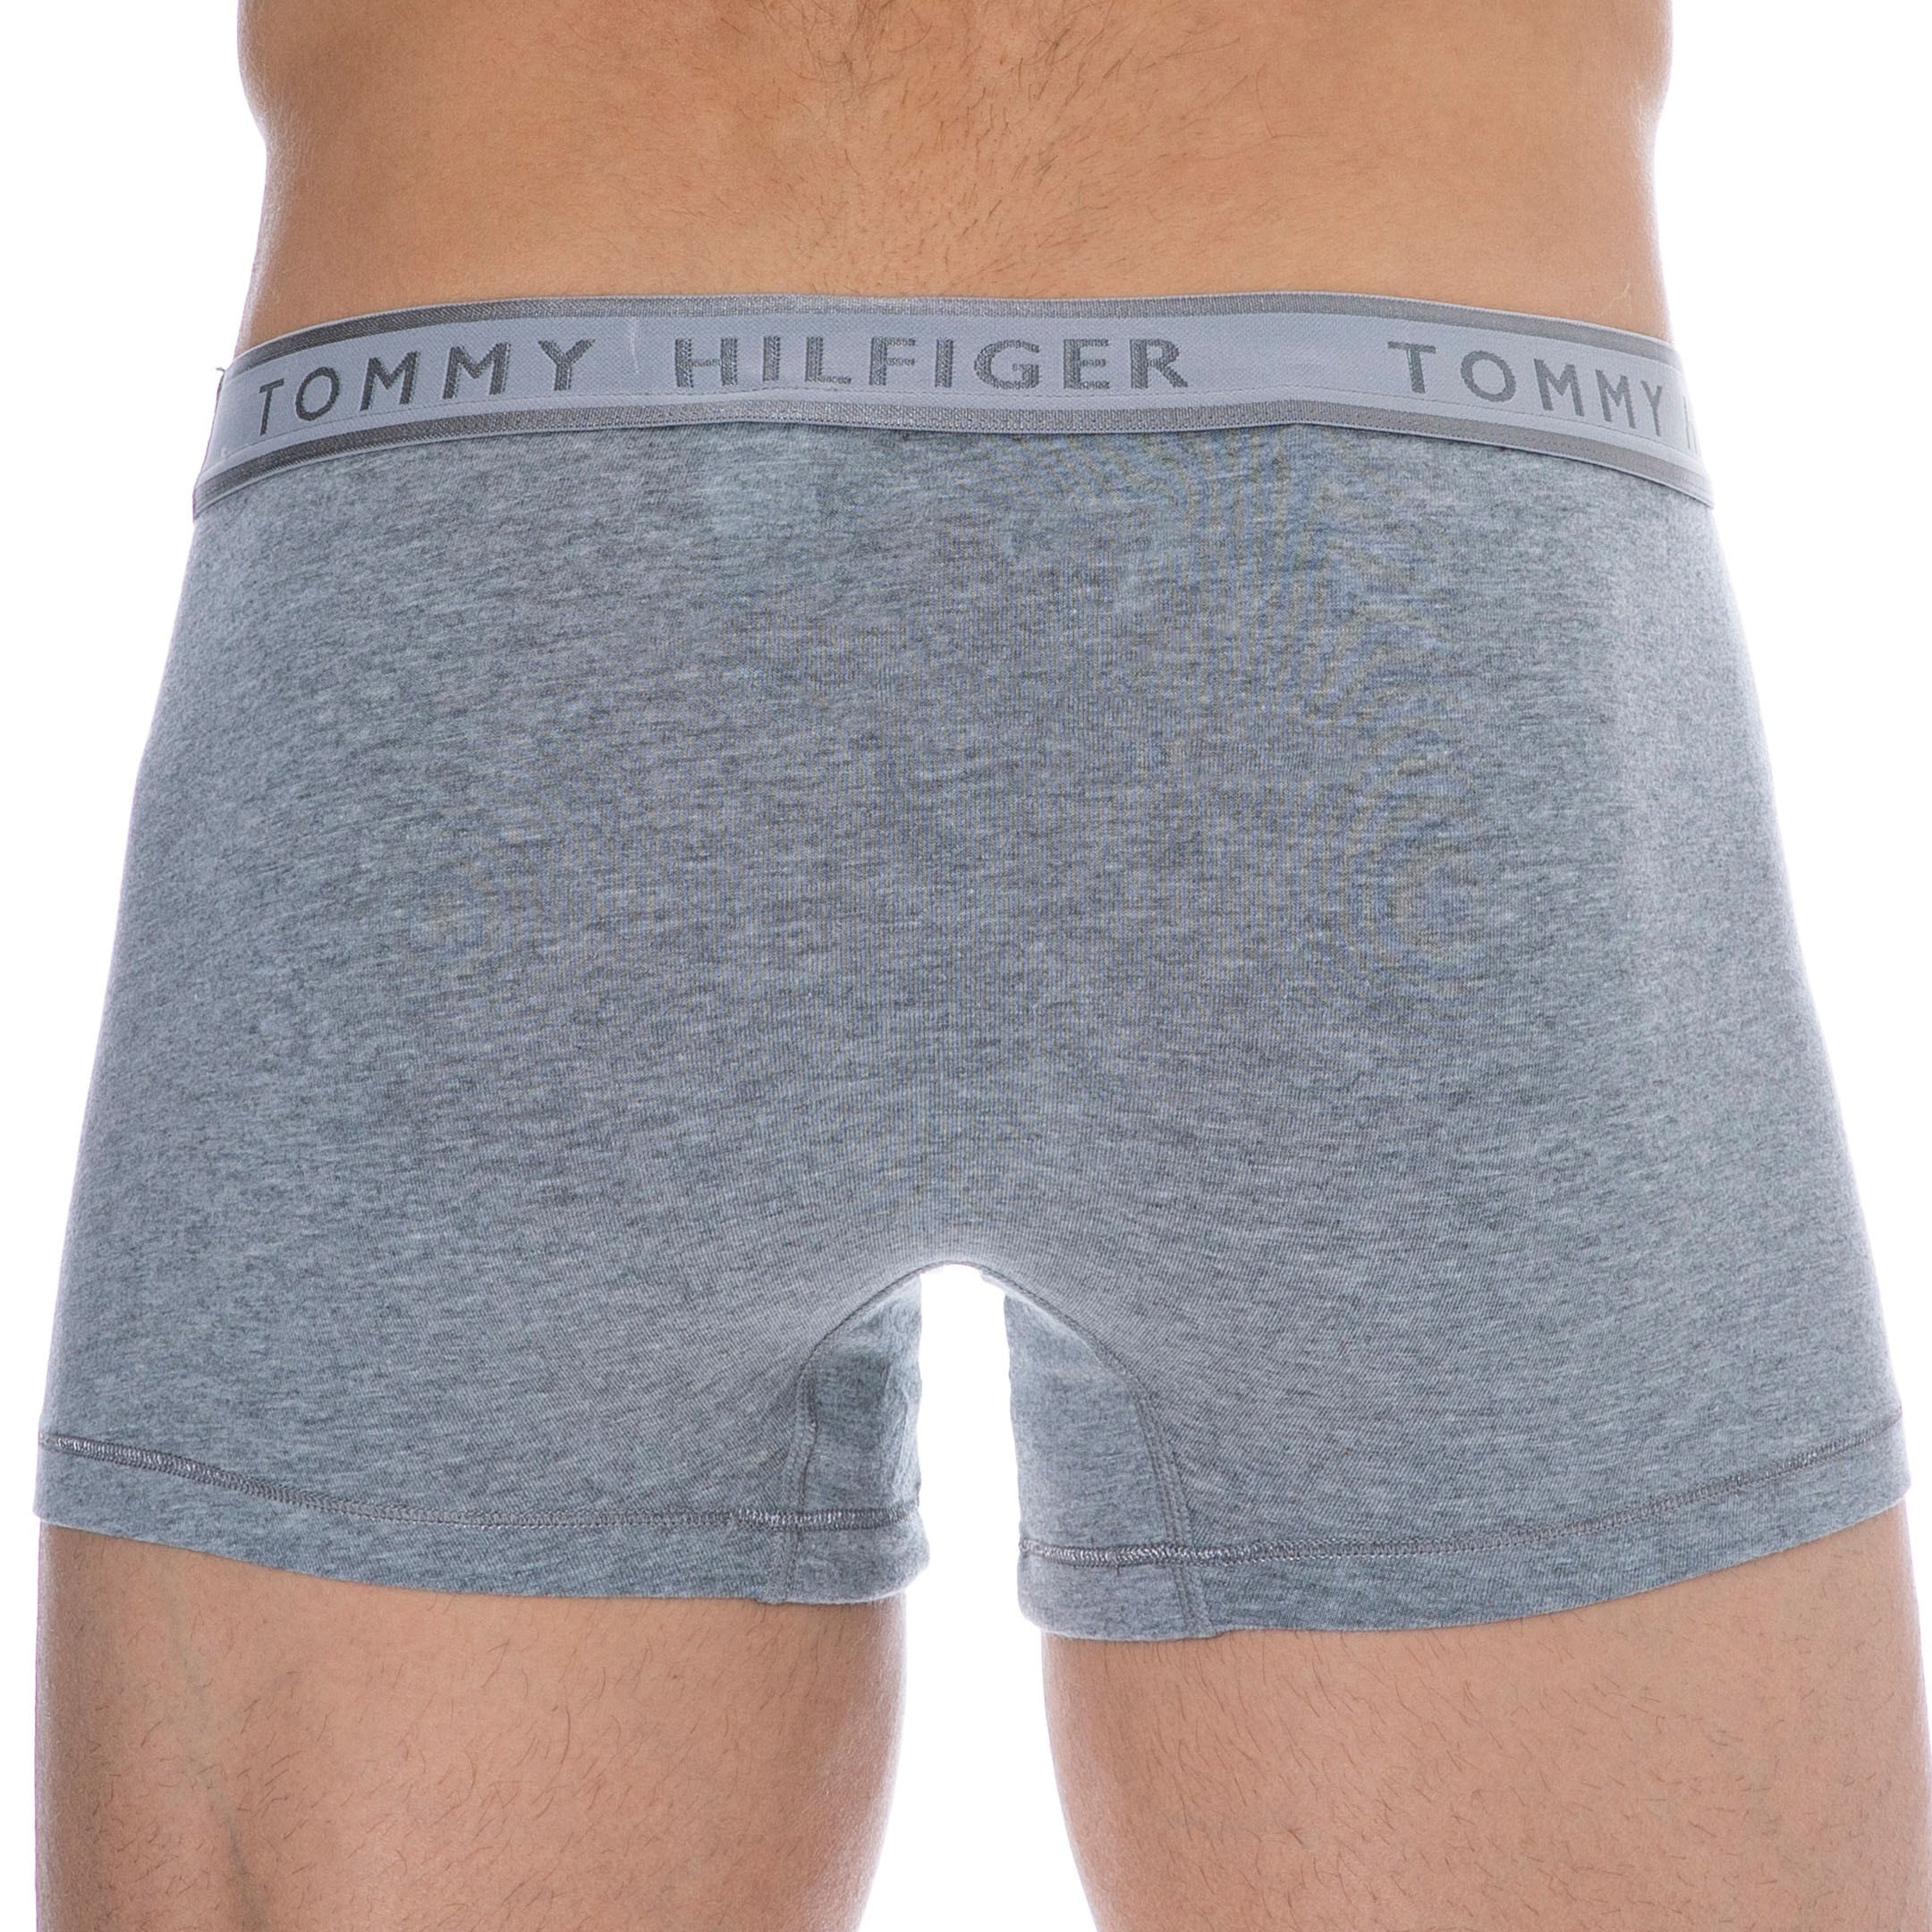 Nationaal volkslied charme Kast Tommy Hilfiger Seacell Boxer Briefs - Heather Grey | INDERWEAR